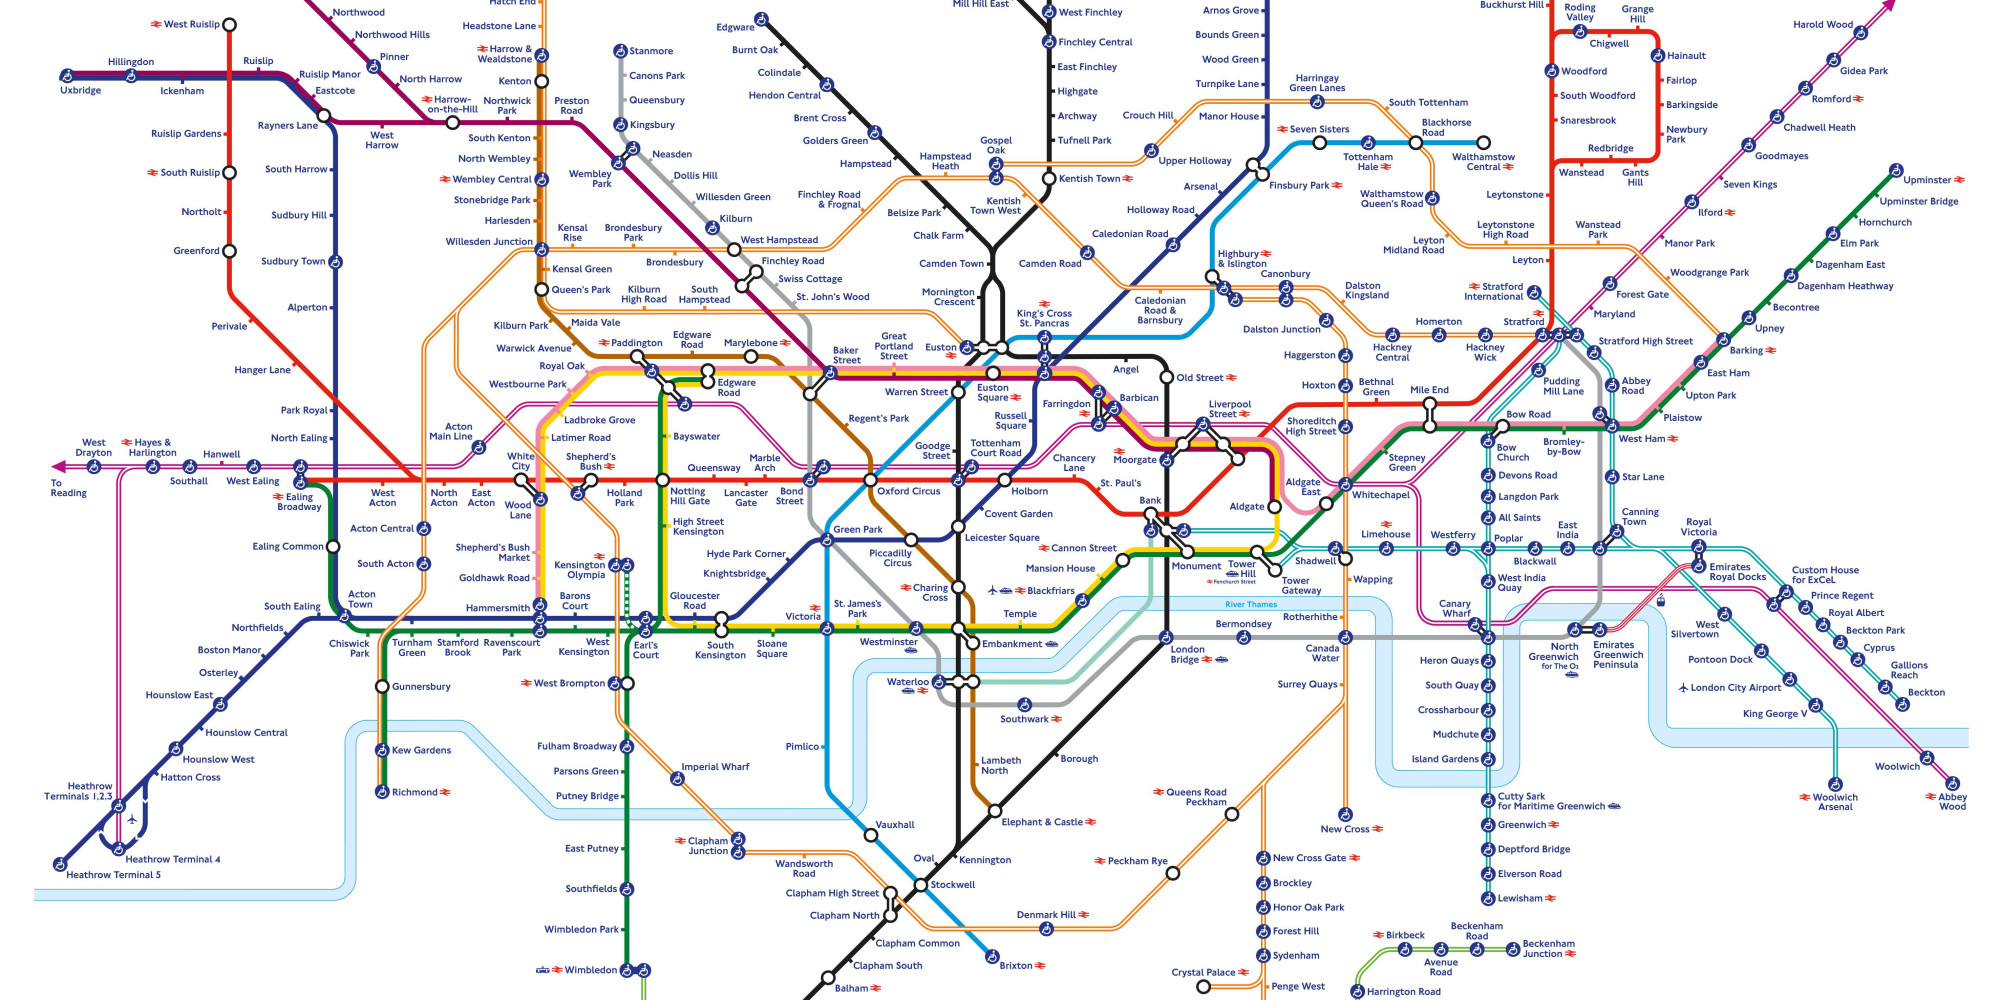 Elizabeth Line London Tube Map Shows How Capital's Underground Will